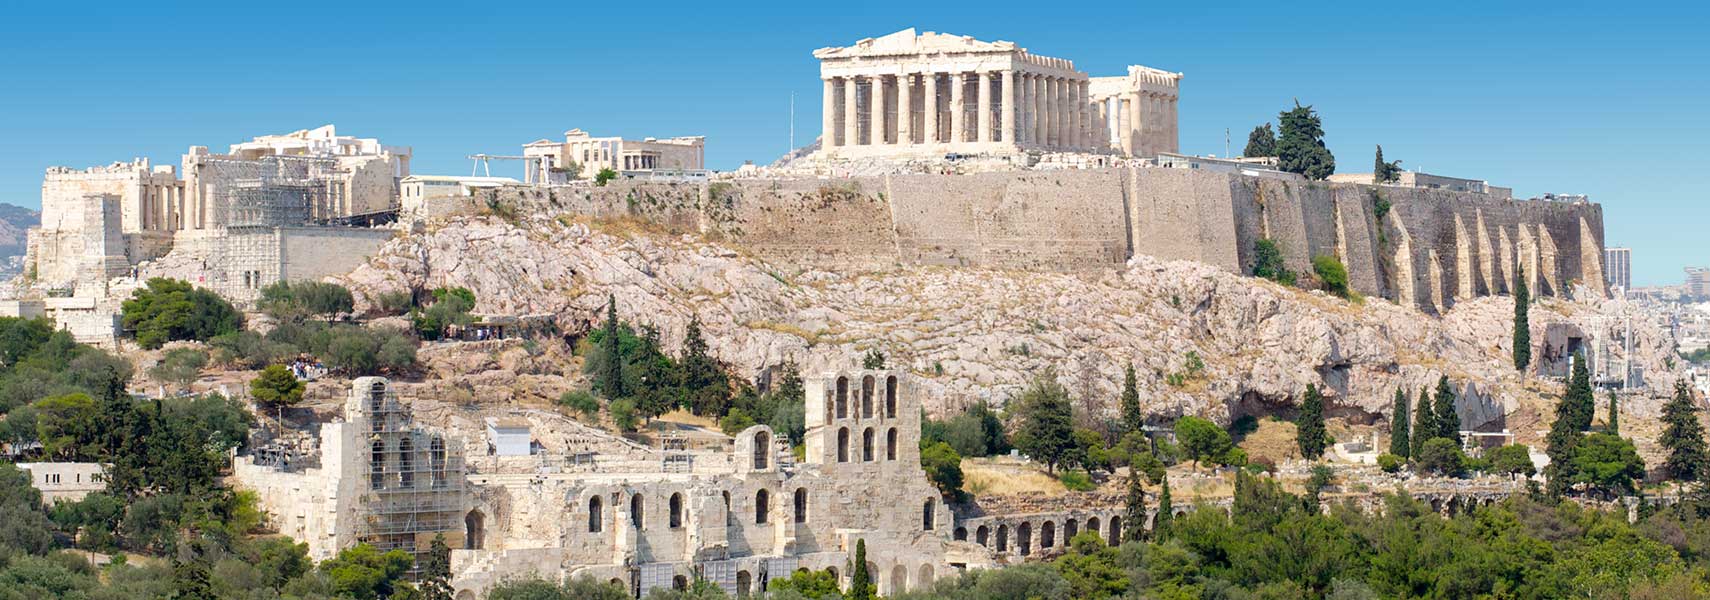 Acropolis Of Athens Backgrounds on Wallpapers Vista